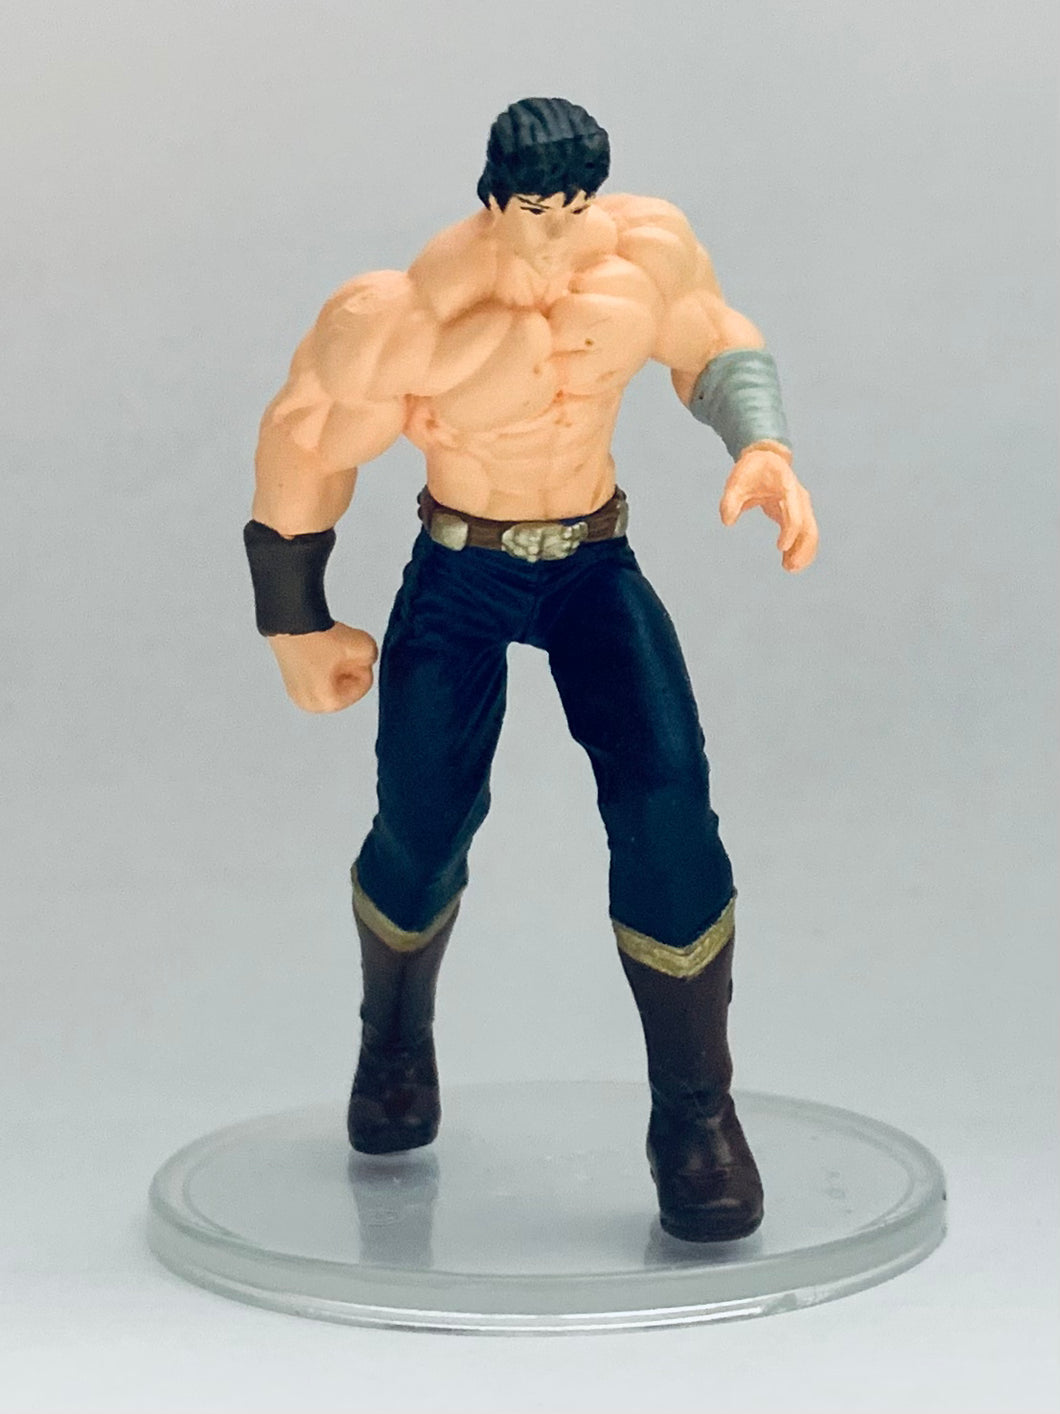 Hokuto no Ken - Kenshirou - Fist of the North Star All-Star Retsuden Capsule Figure Collection Part 2